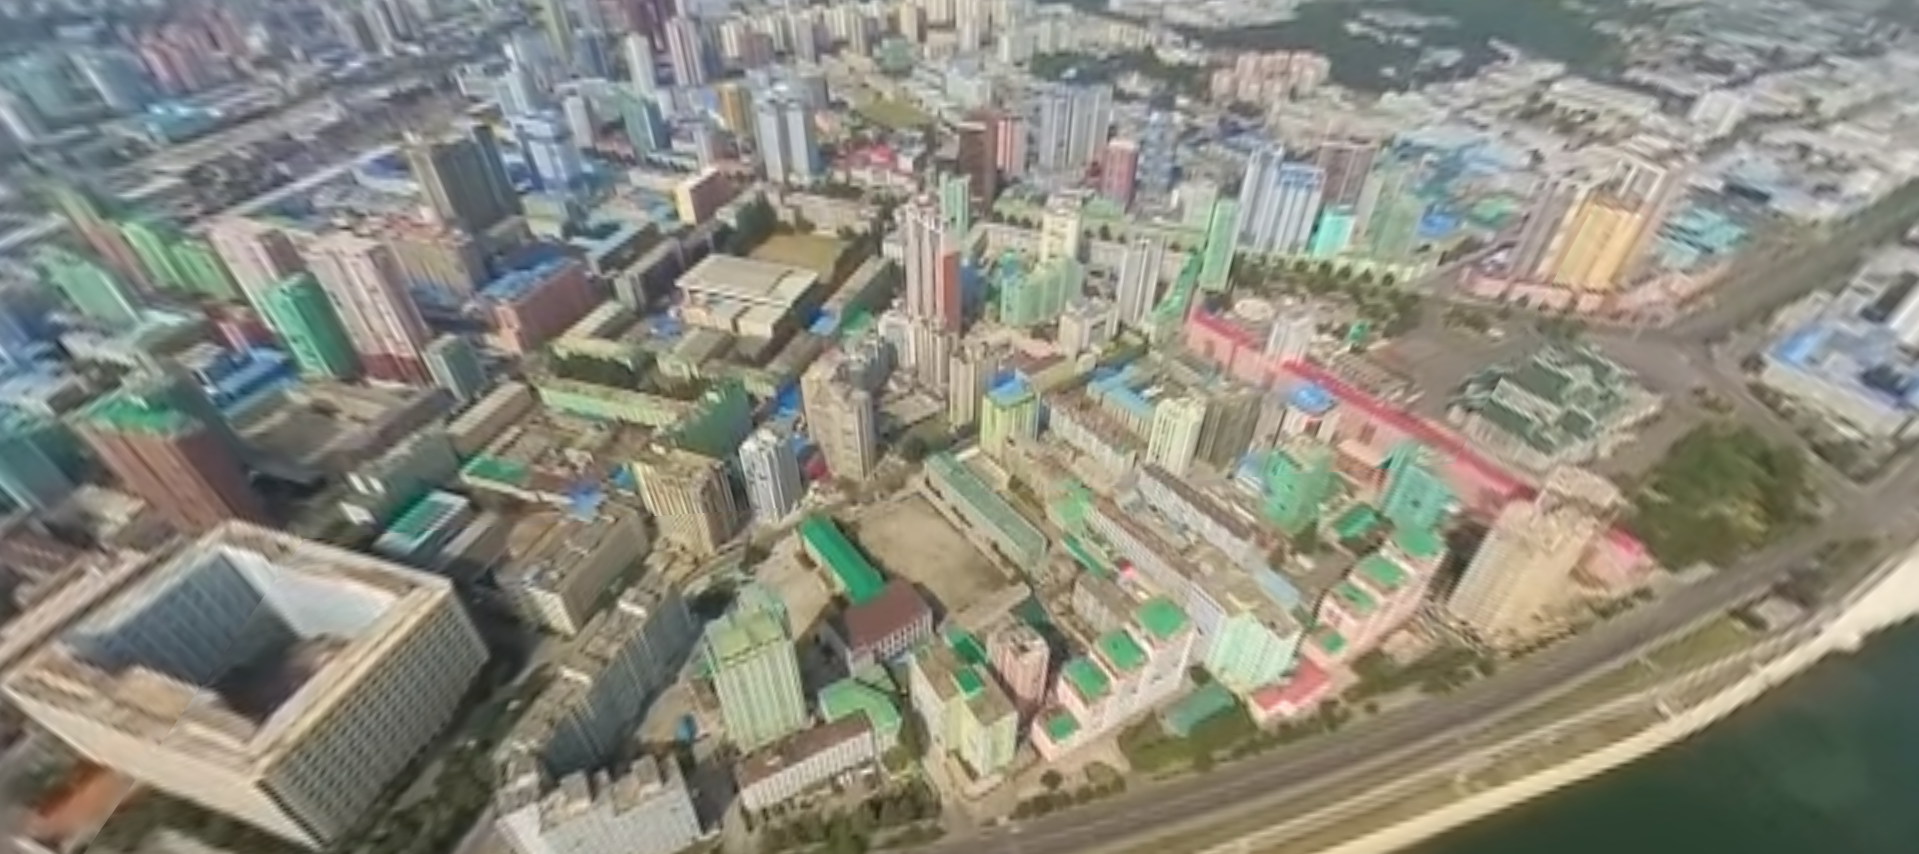 View the world's first video in a 360 degree shot of the sky over North Korea